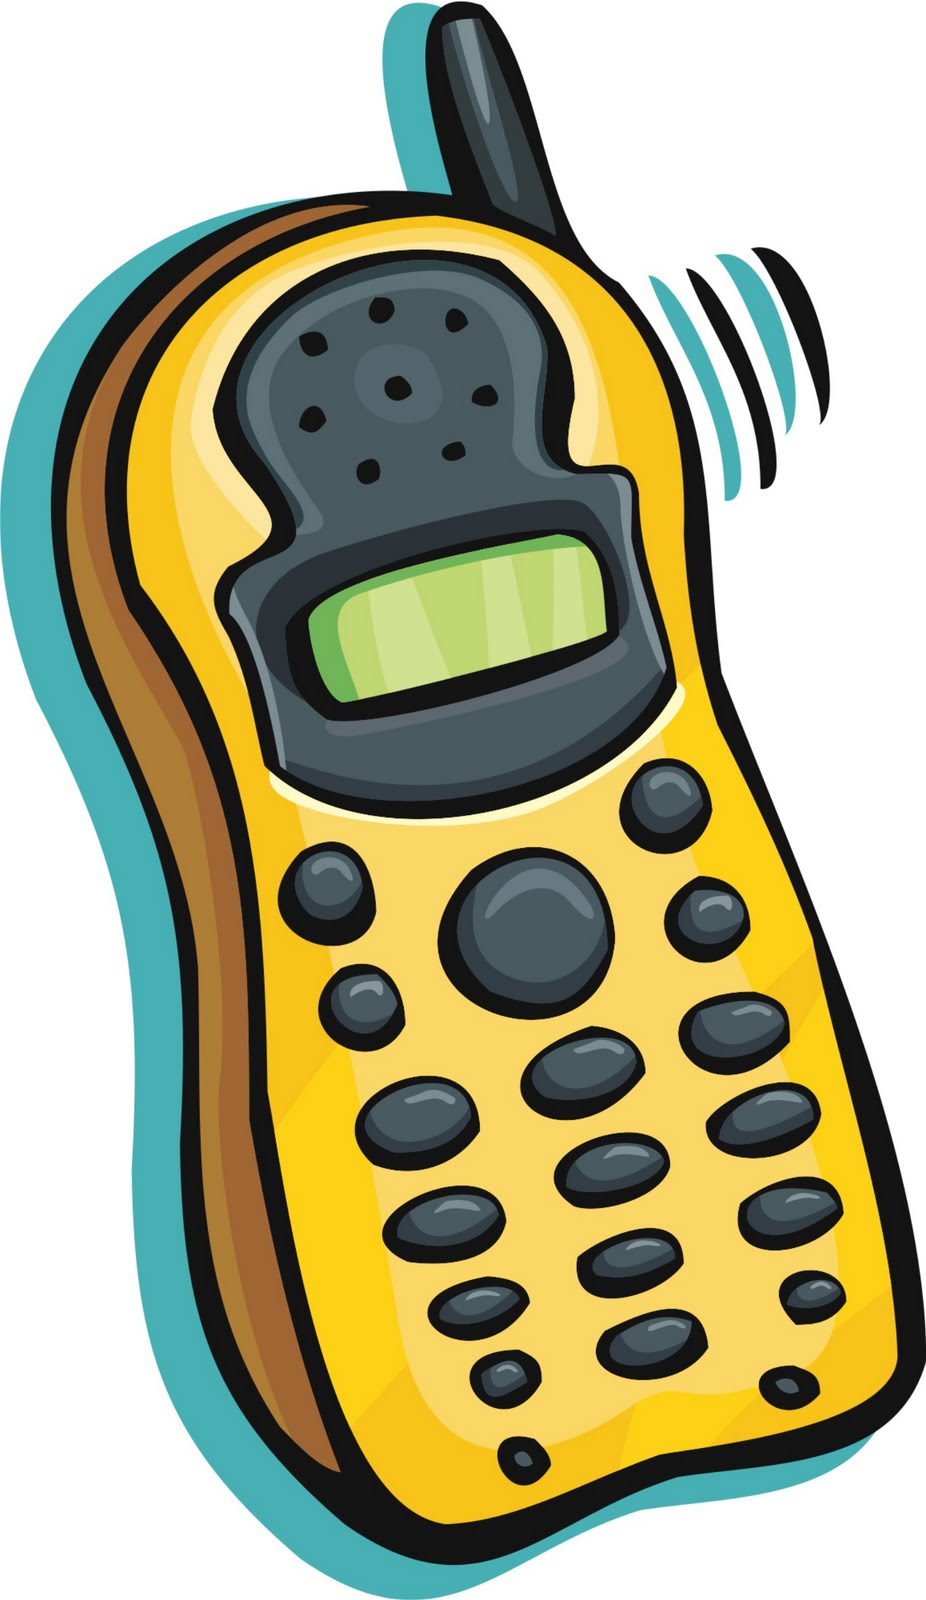 Phone Call Clipart   Clipart Panda   Free Clipart Images